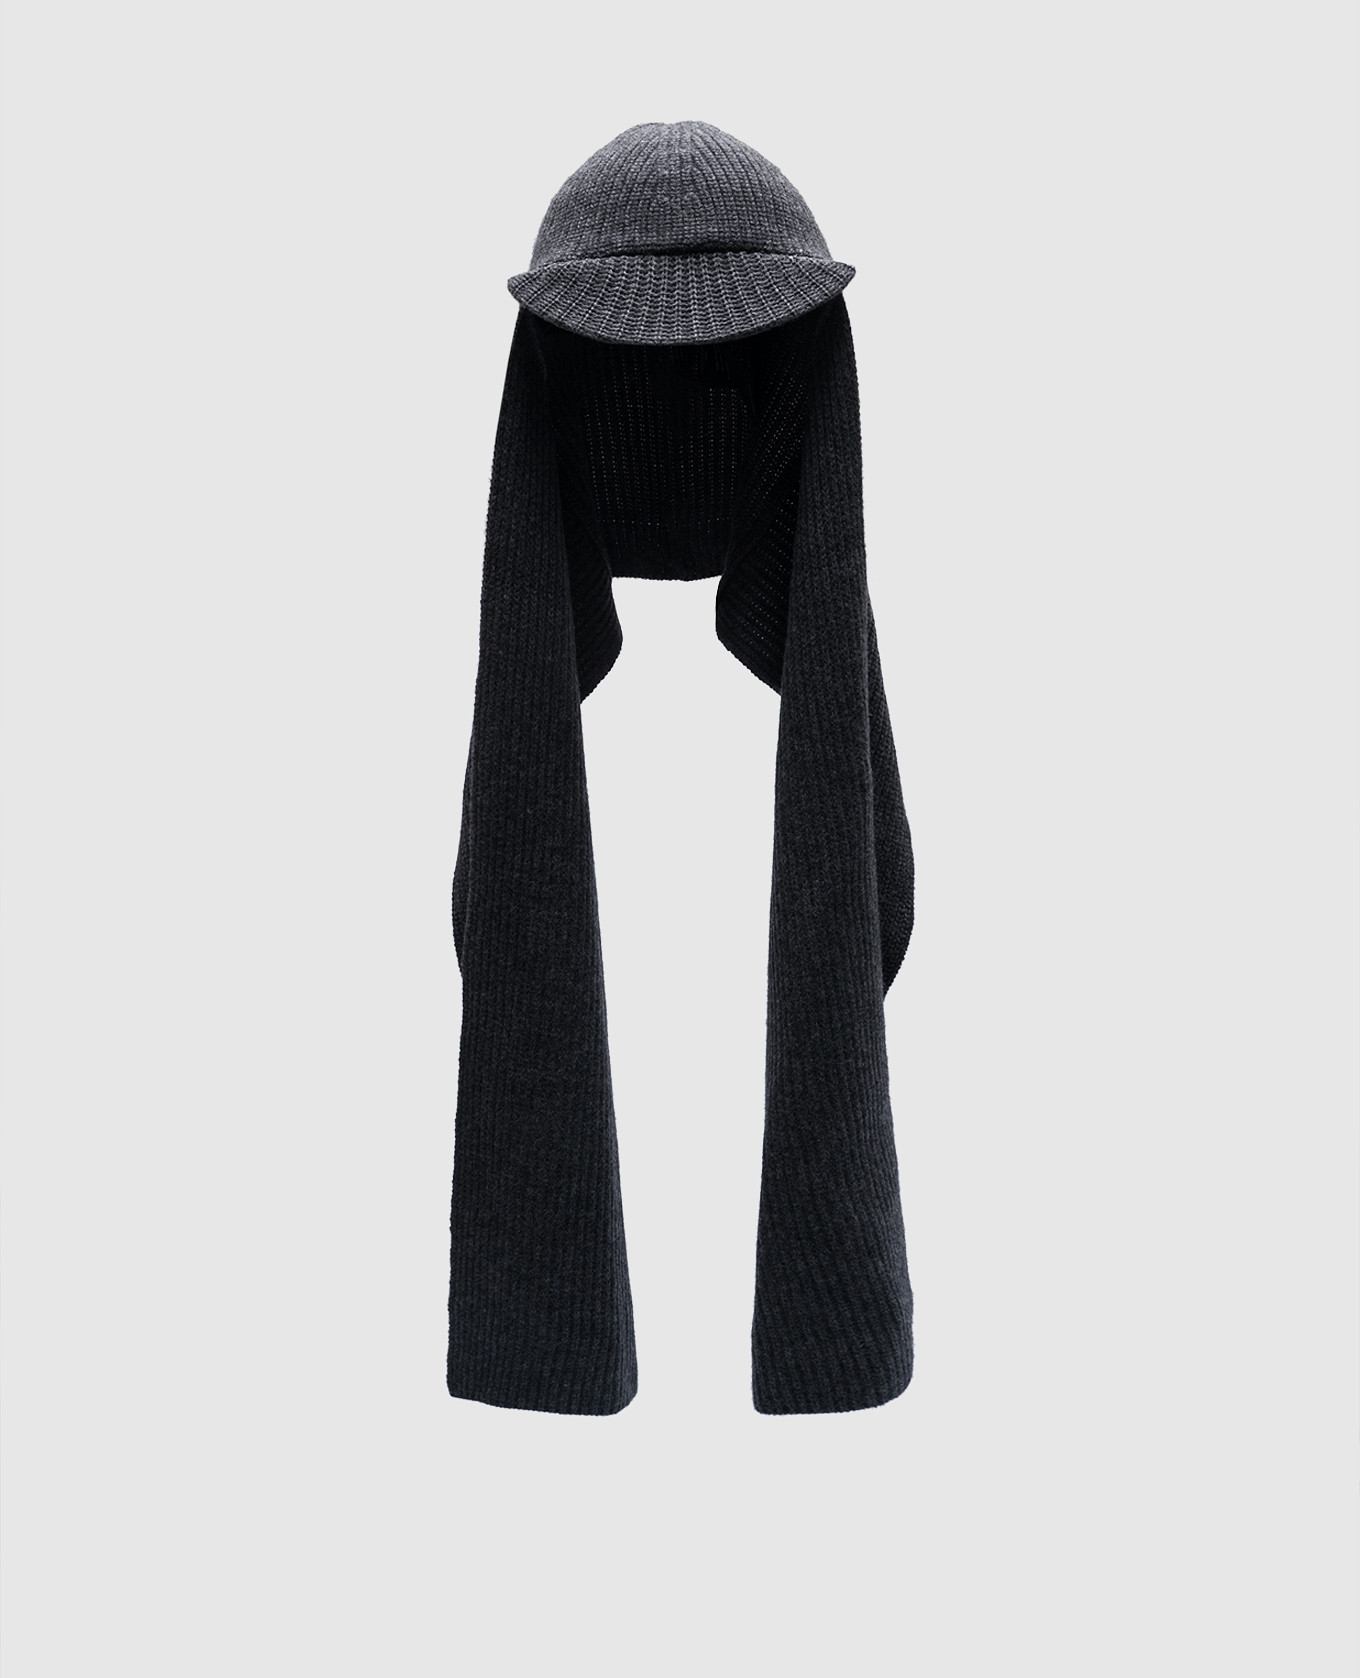 Gray hat with a scarf made of wool and cashmere